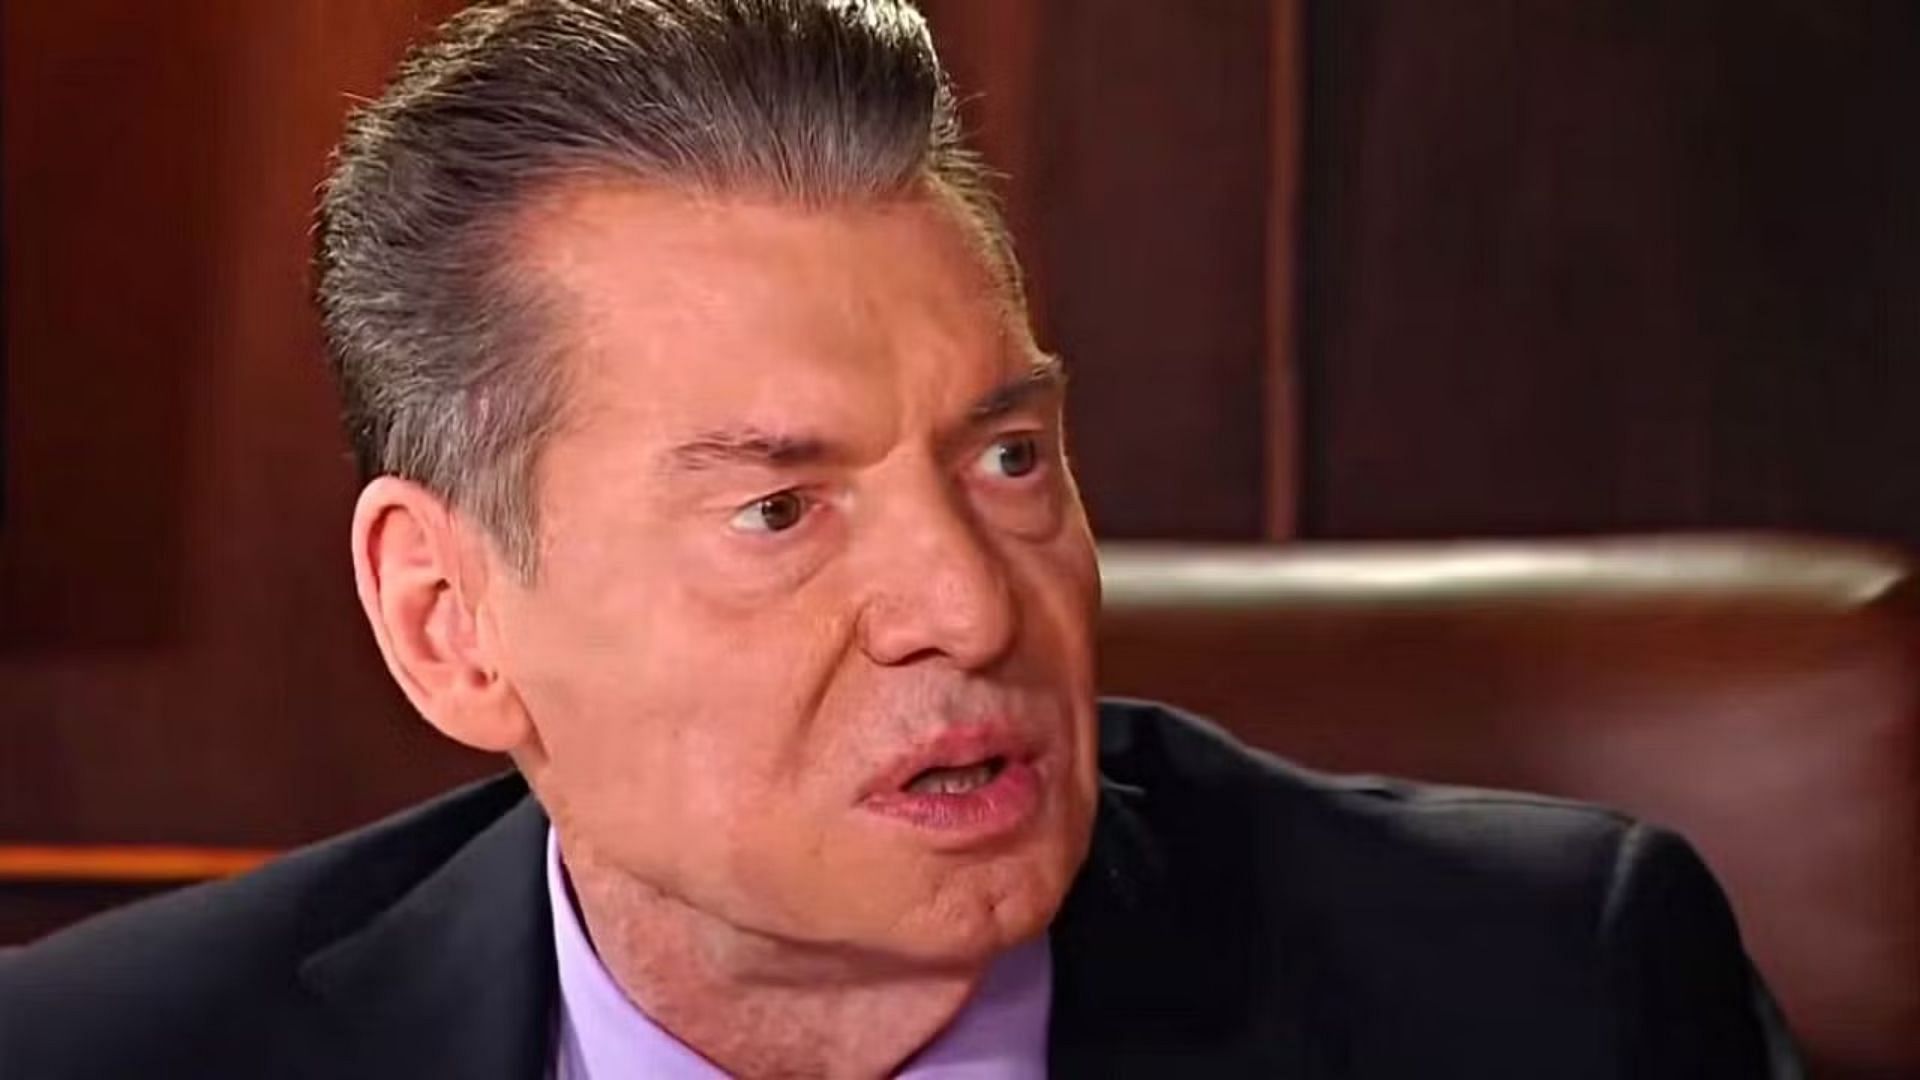 Vince McMahon recently returned to WWE